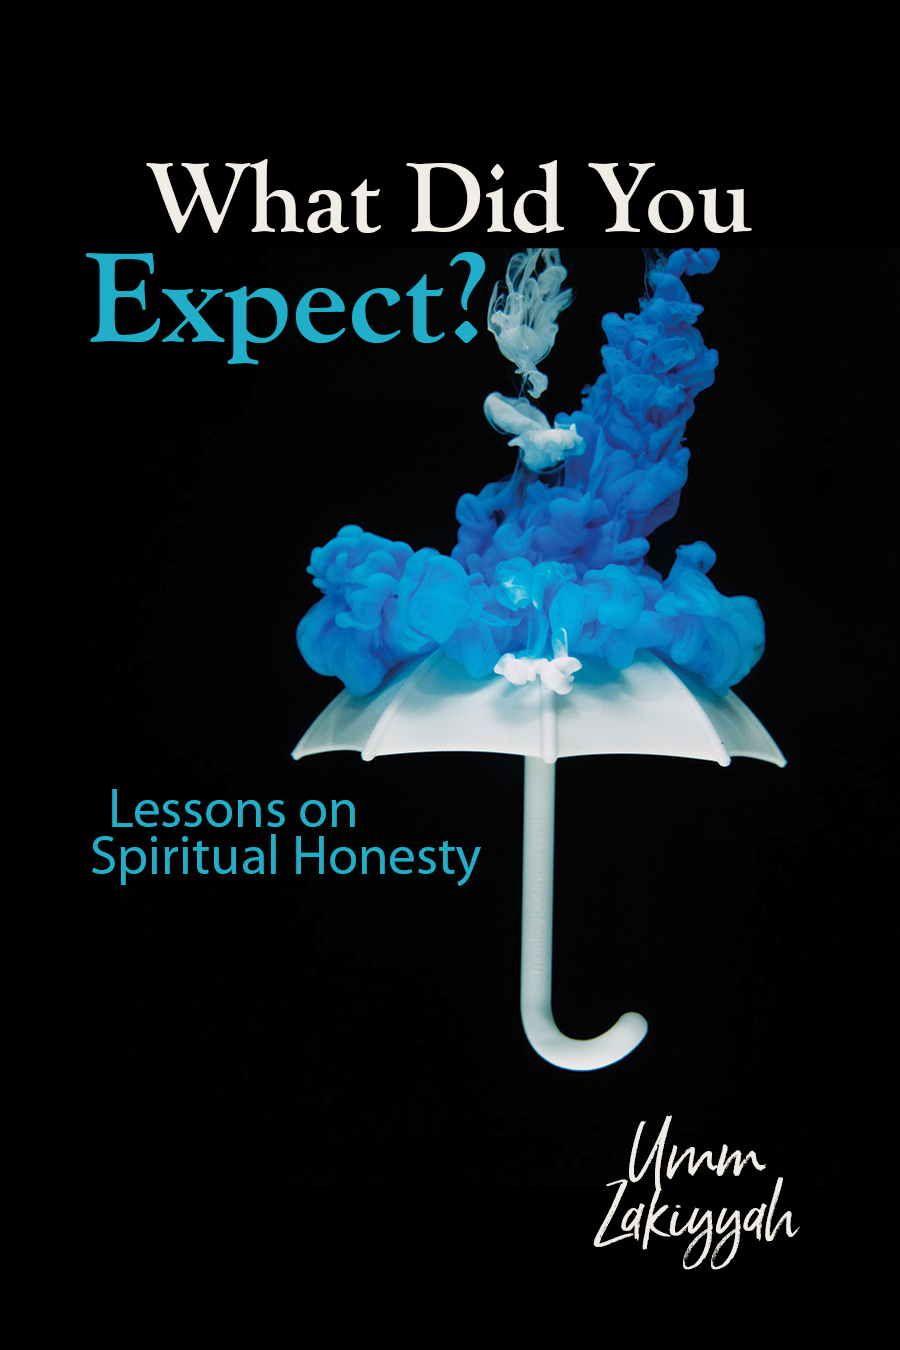 What Did You Expect? Lessons on Spiritual Honesty BOOK COVER